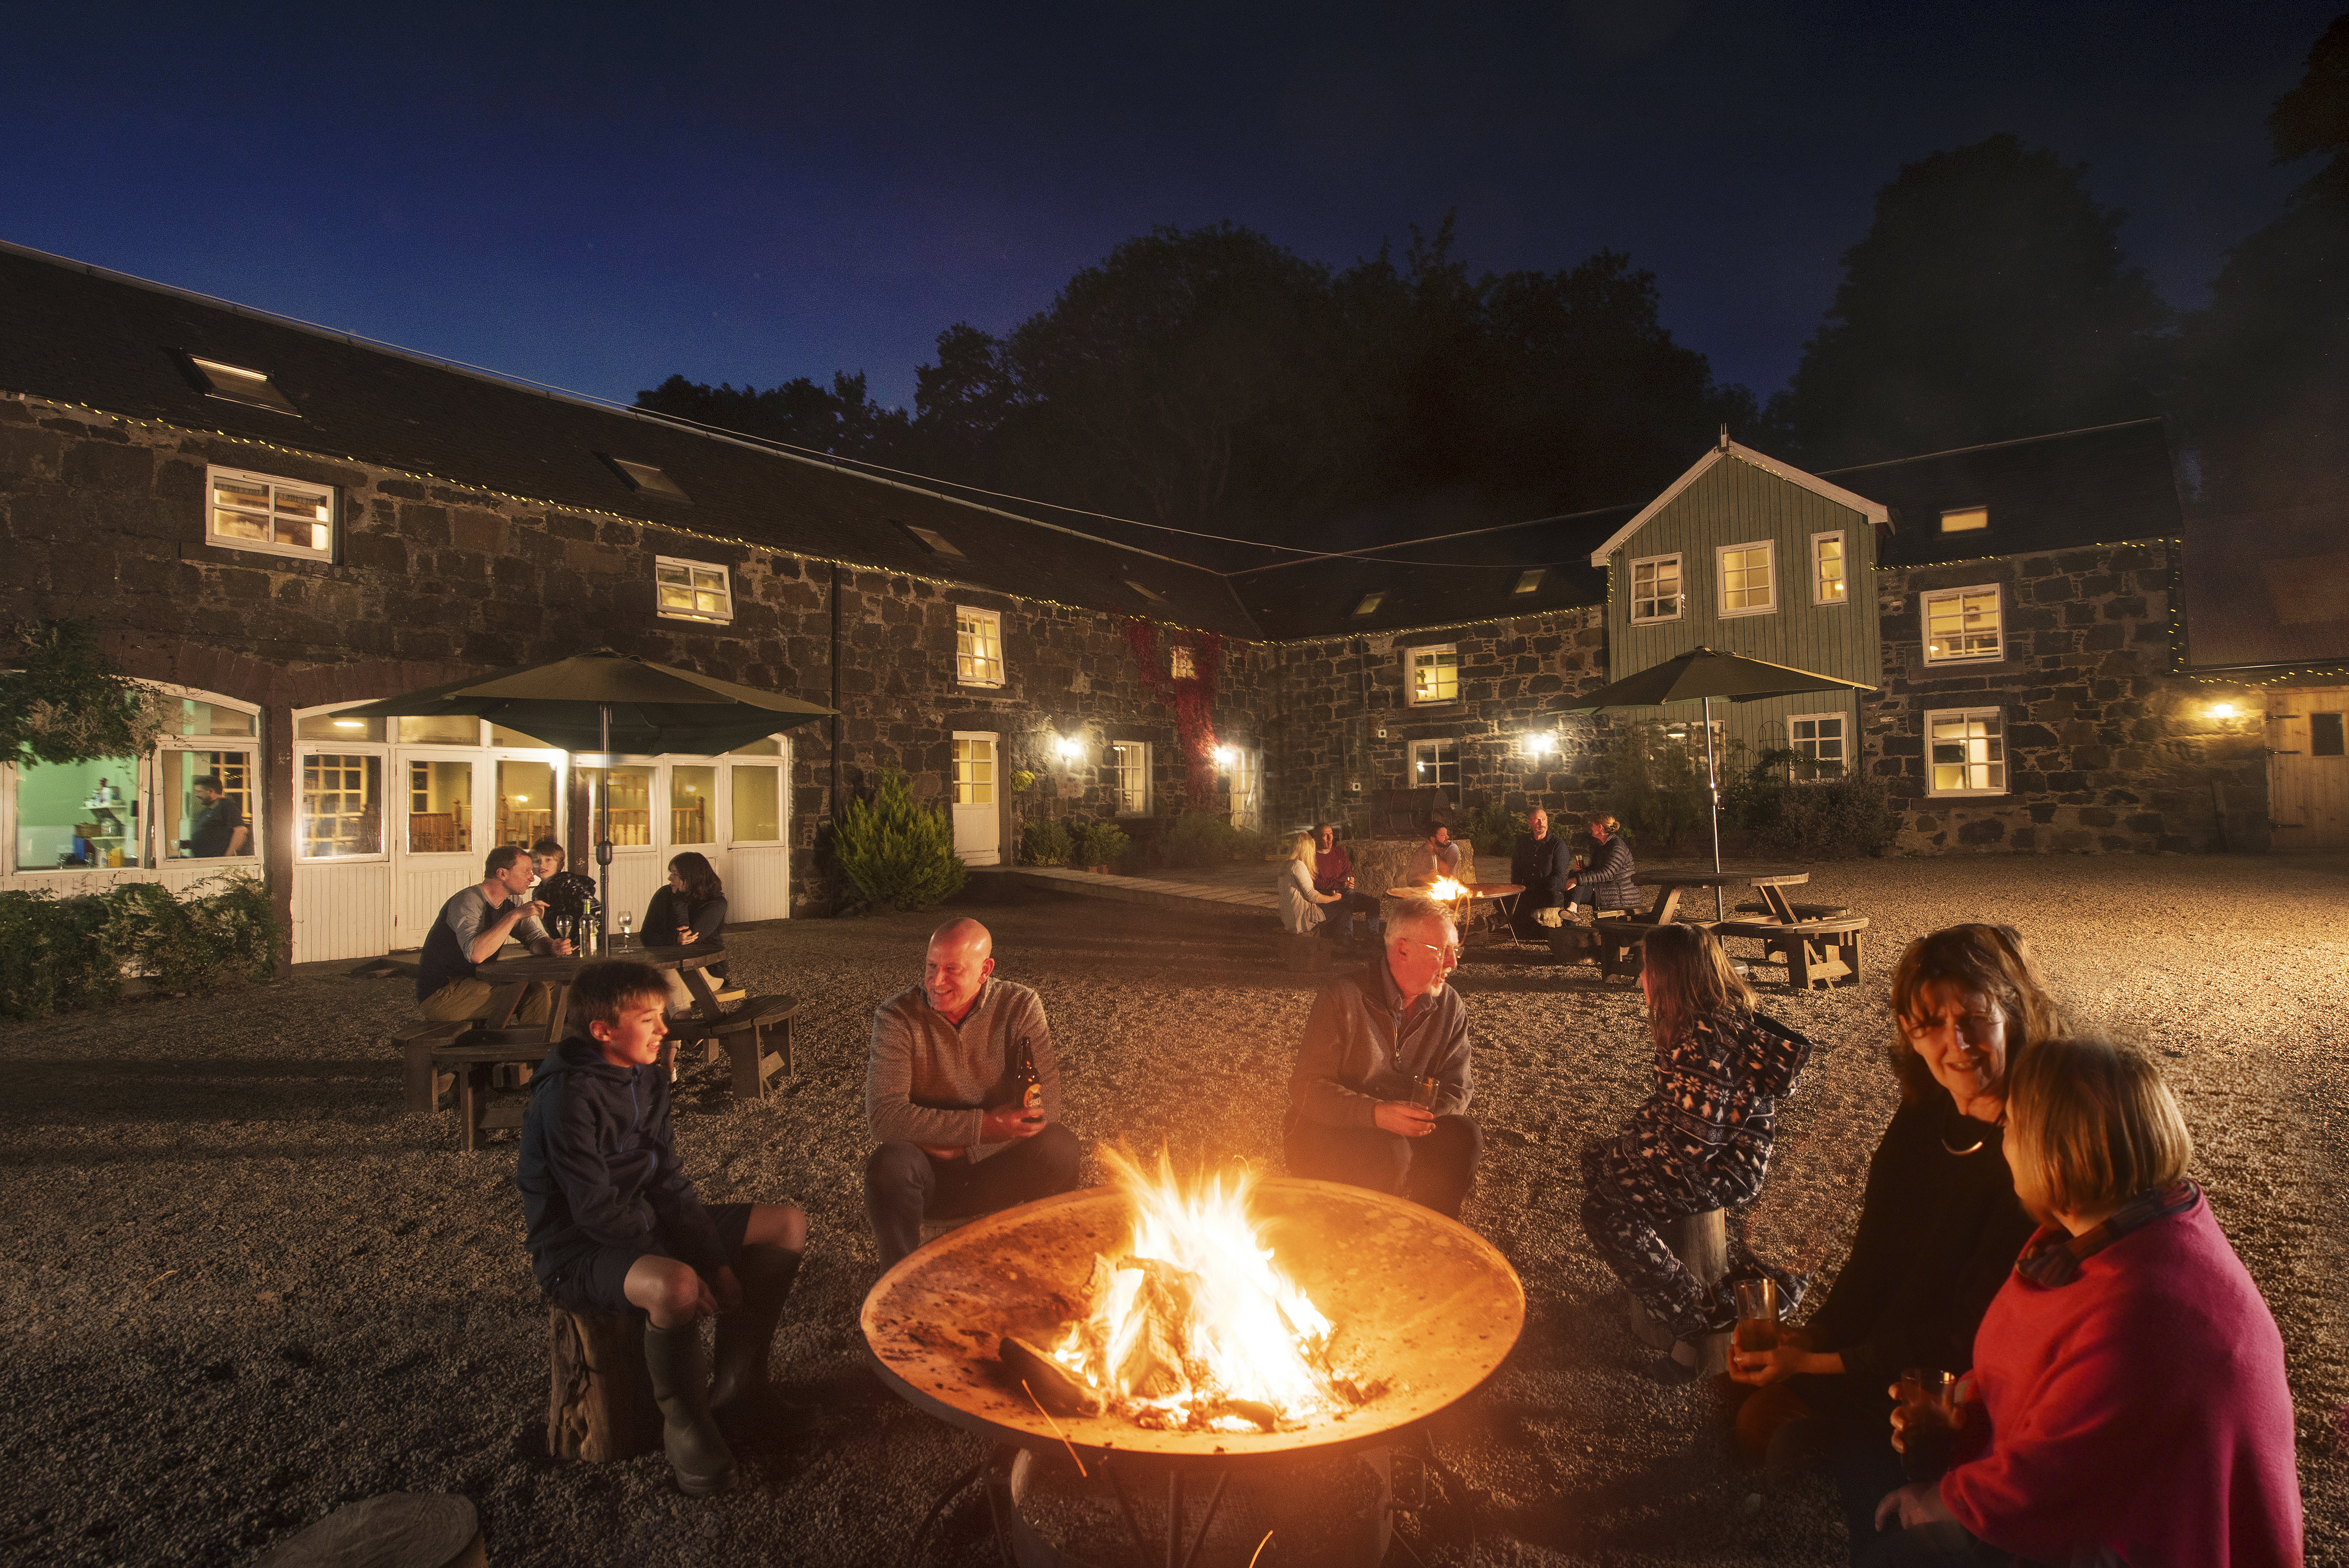 Comrie Croft Farm with Outdoor Fire Pit